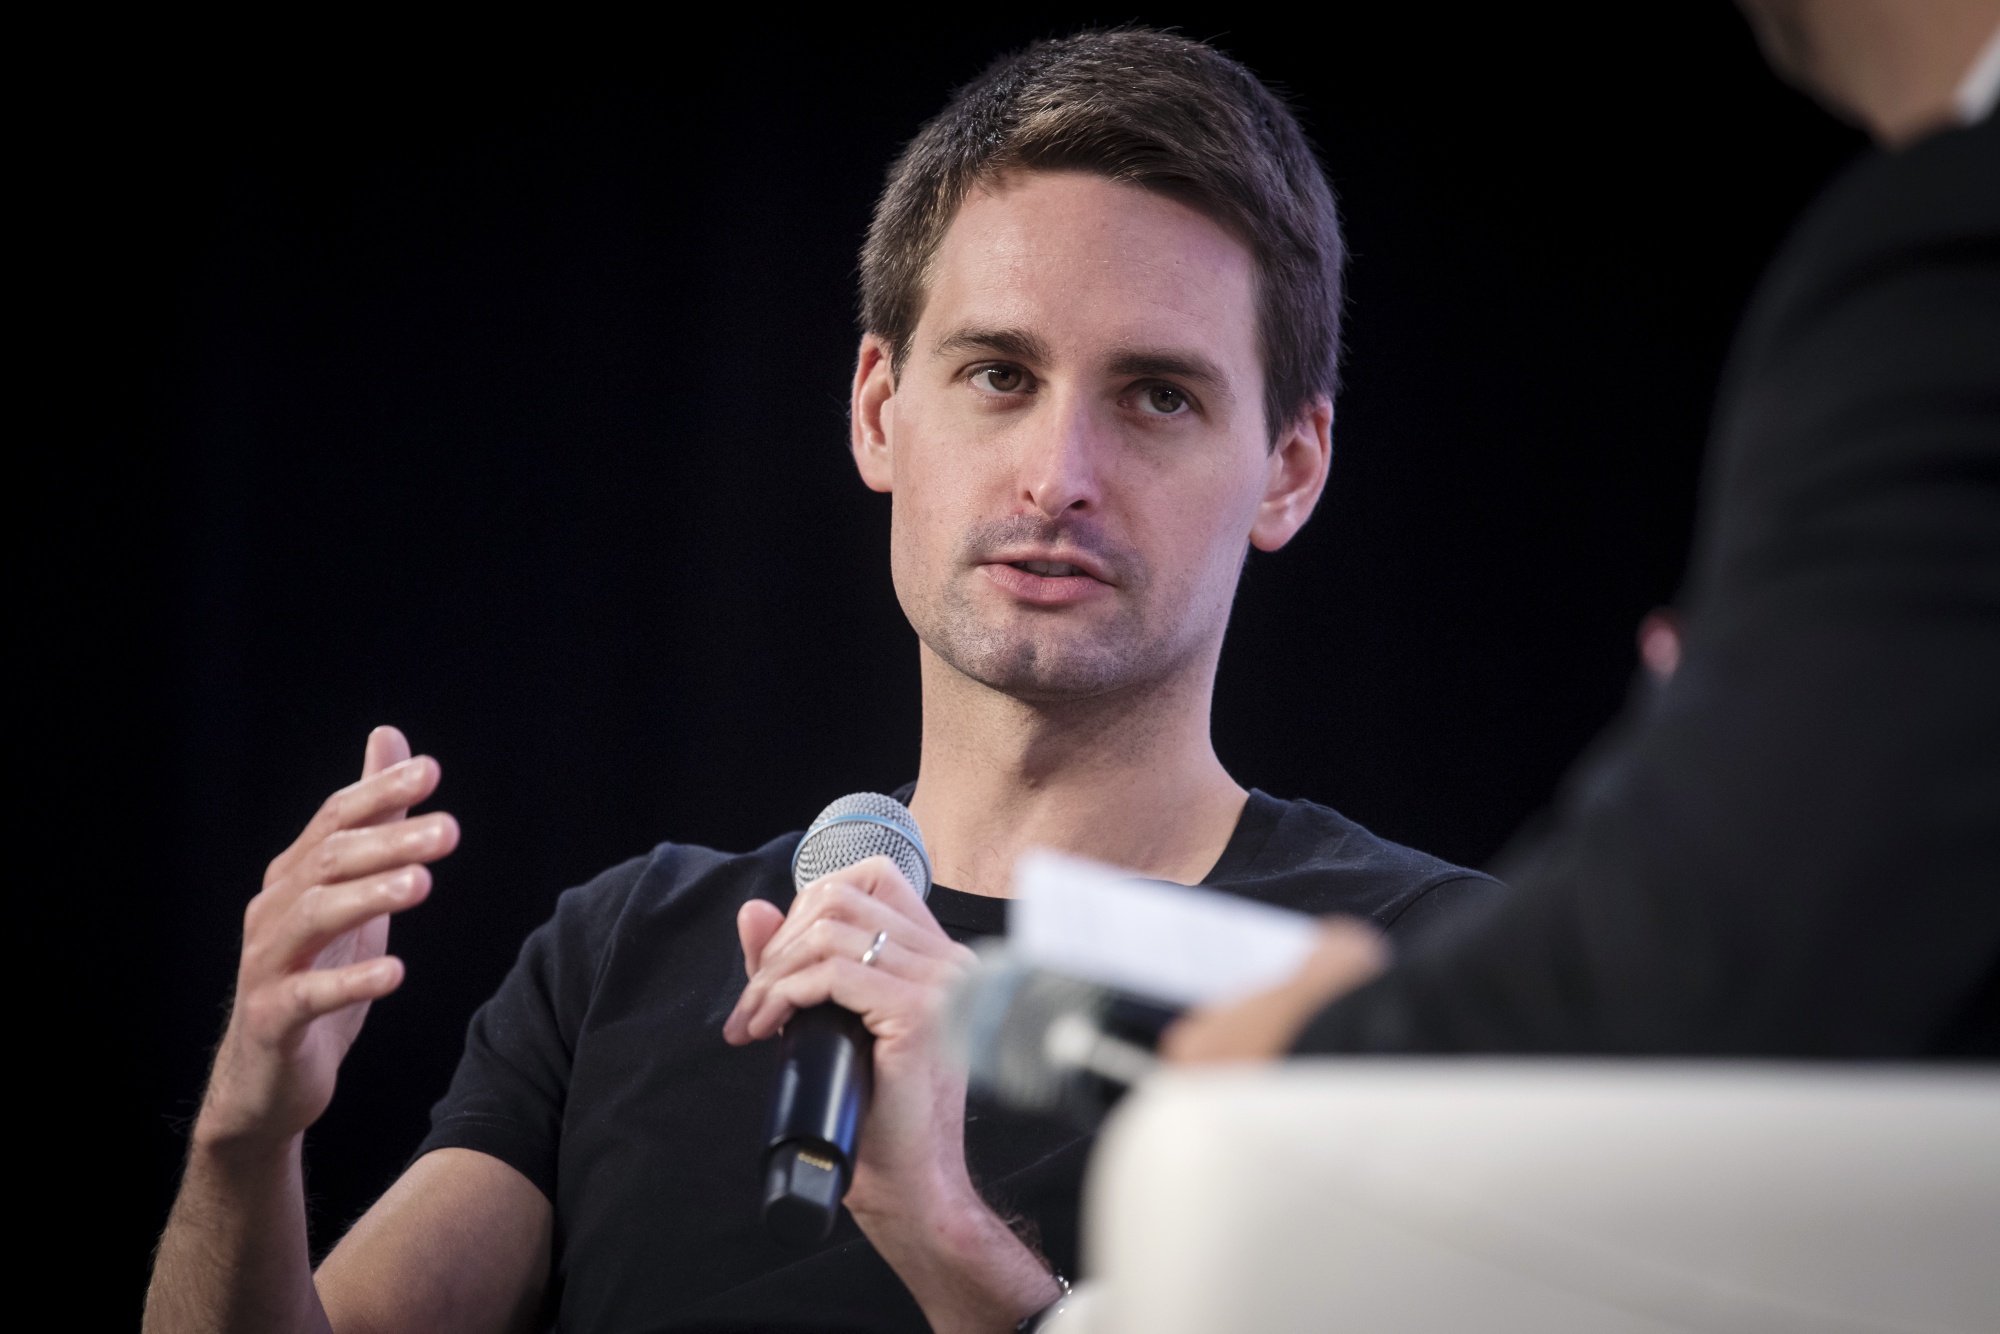 Evan Spiegel: the Life, Career, and Education of the Snap CEO